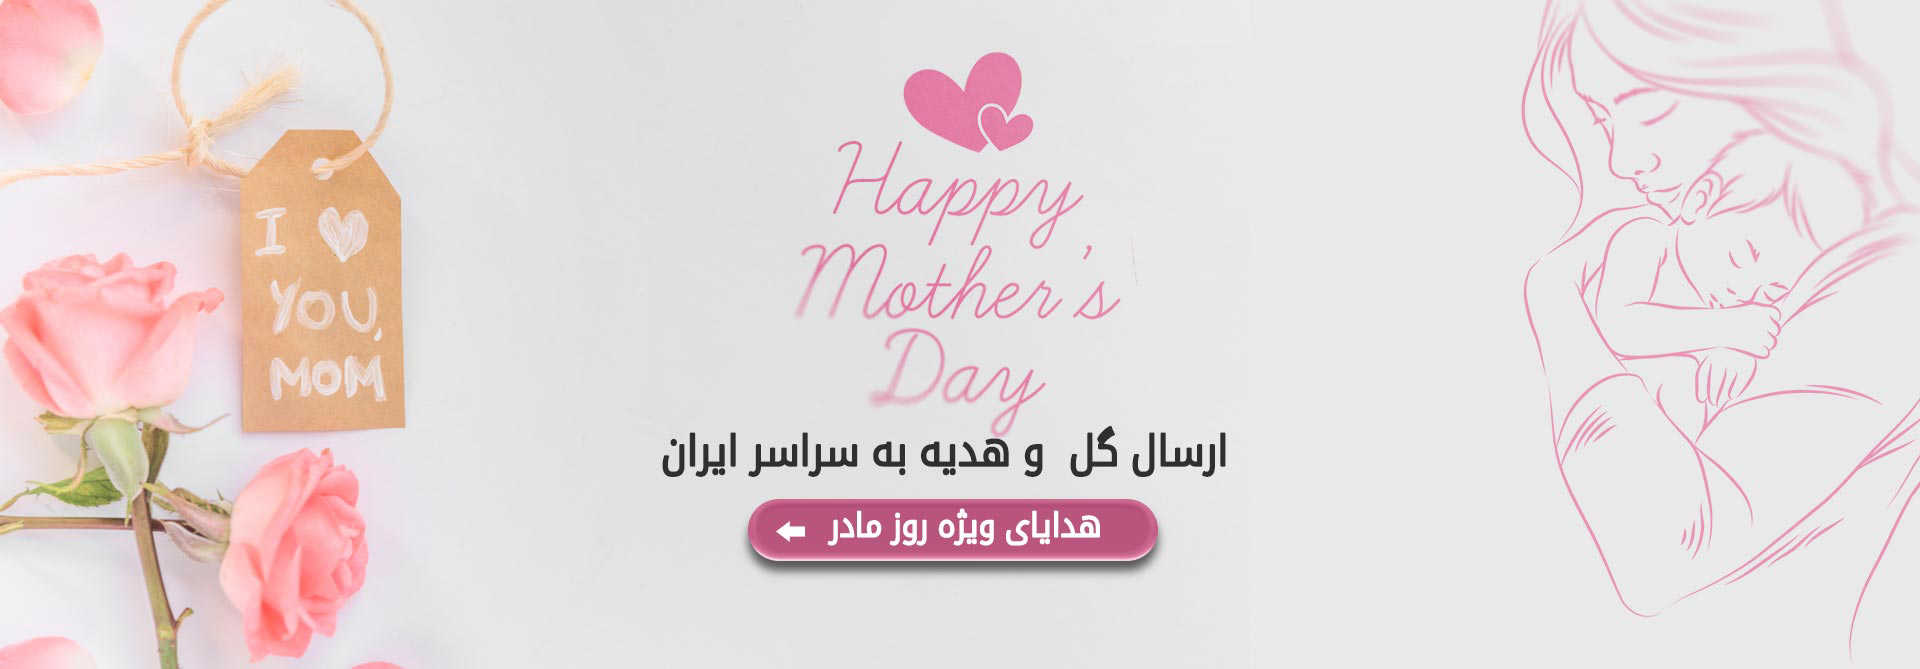 Send Mother's and Woman's Day Gift to all over Iran | Order Mother's Day Flowers | Online Shopping for Mother's Day Flowers With Titigift Florist | Mother's Day flower order